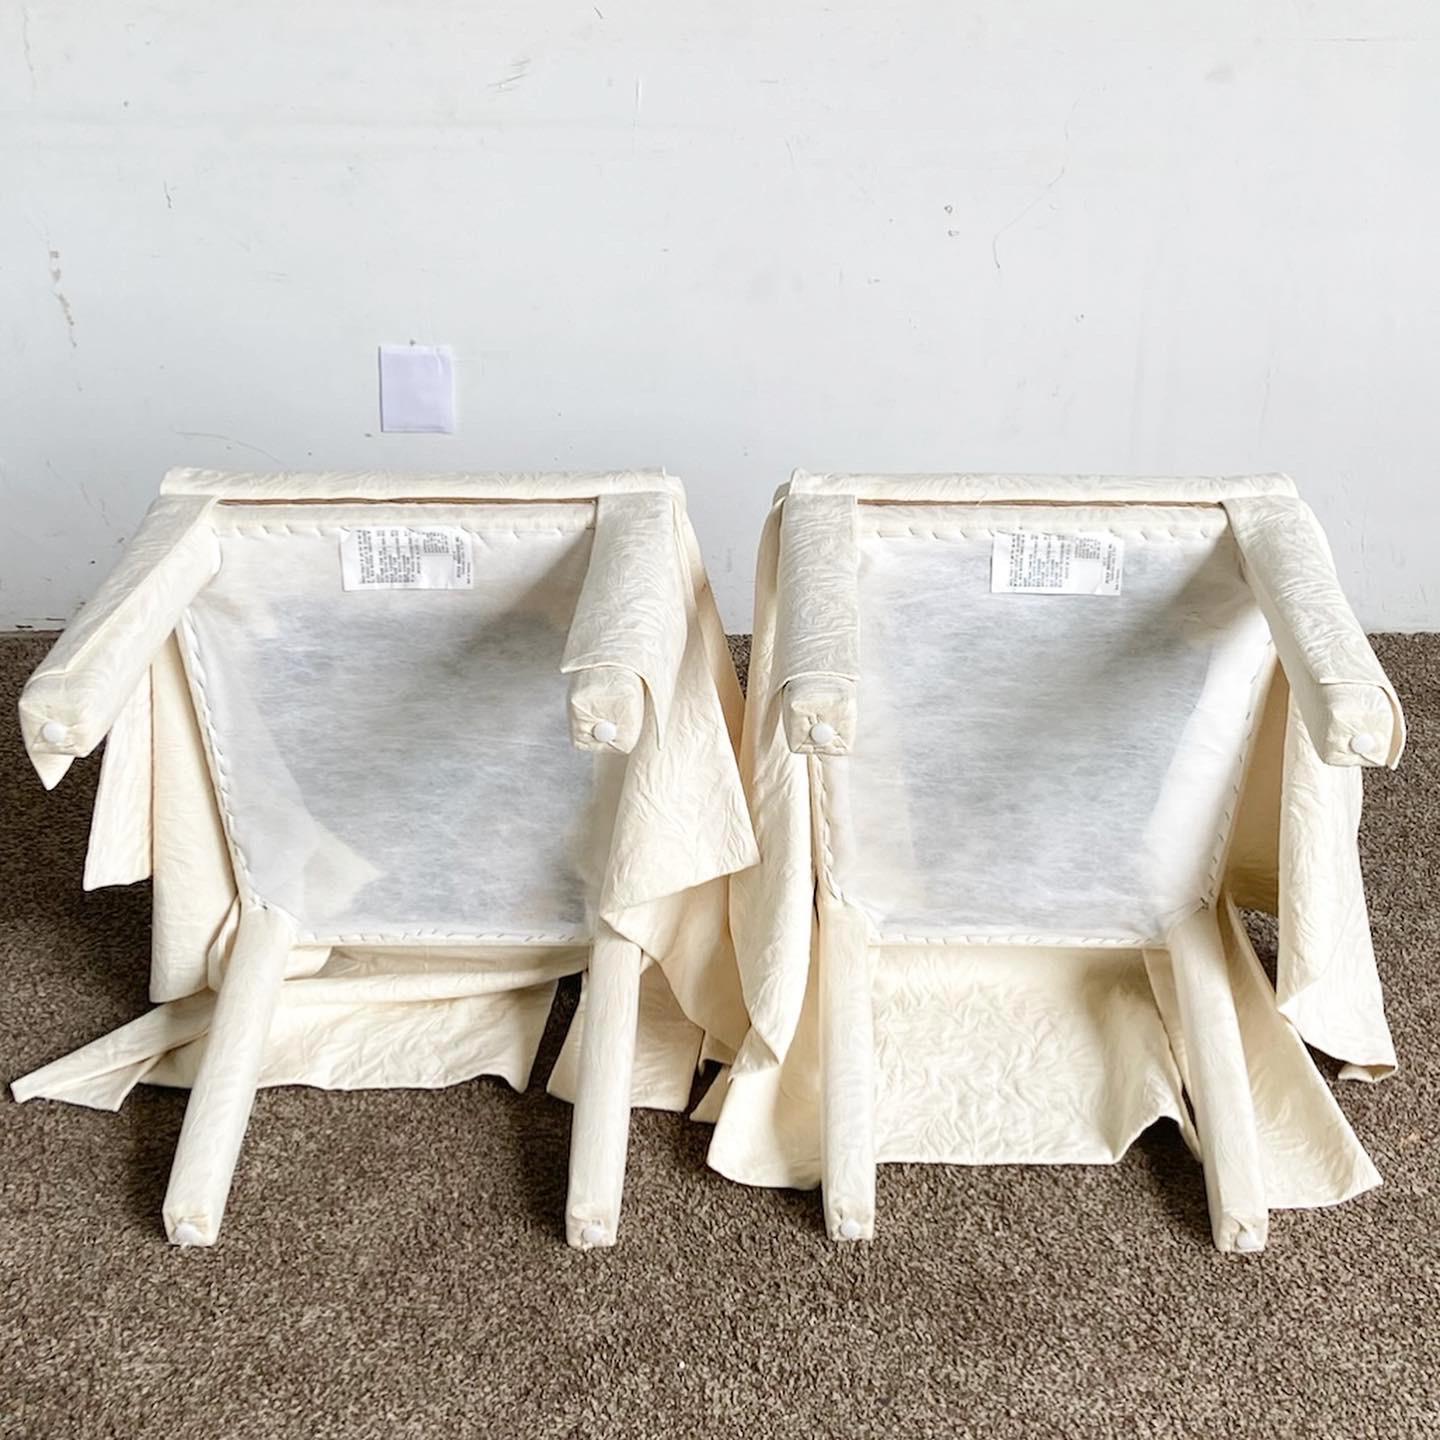 Late 20th Century Regency Chic White Skirted Dining Chairs - Set of 6 For Sale